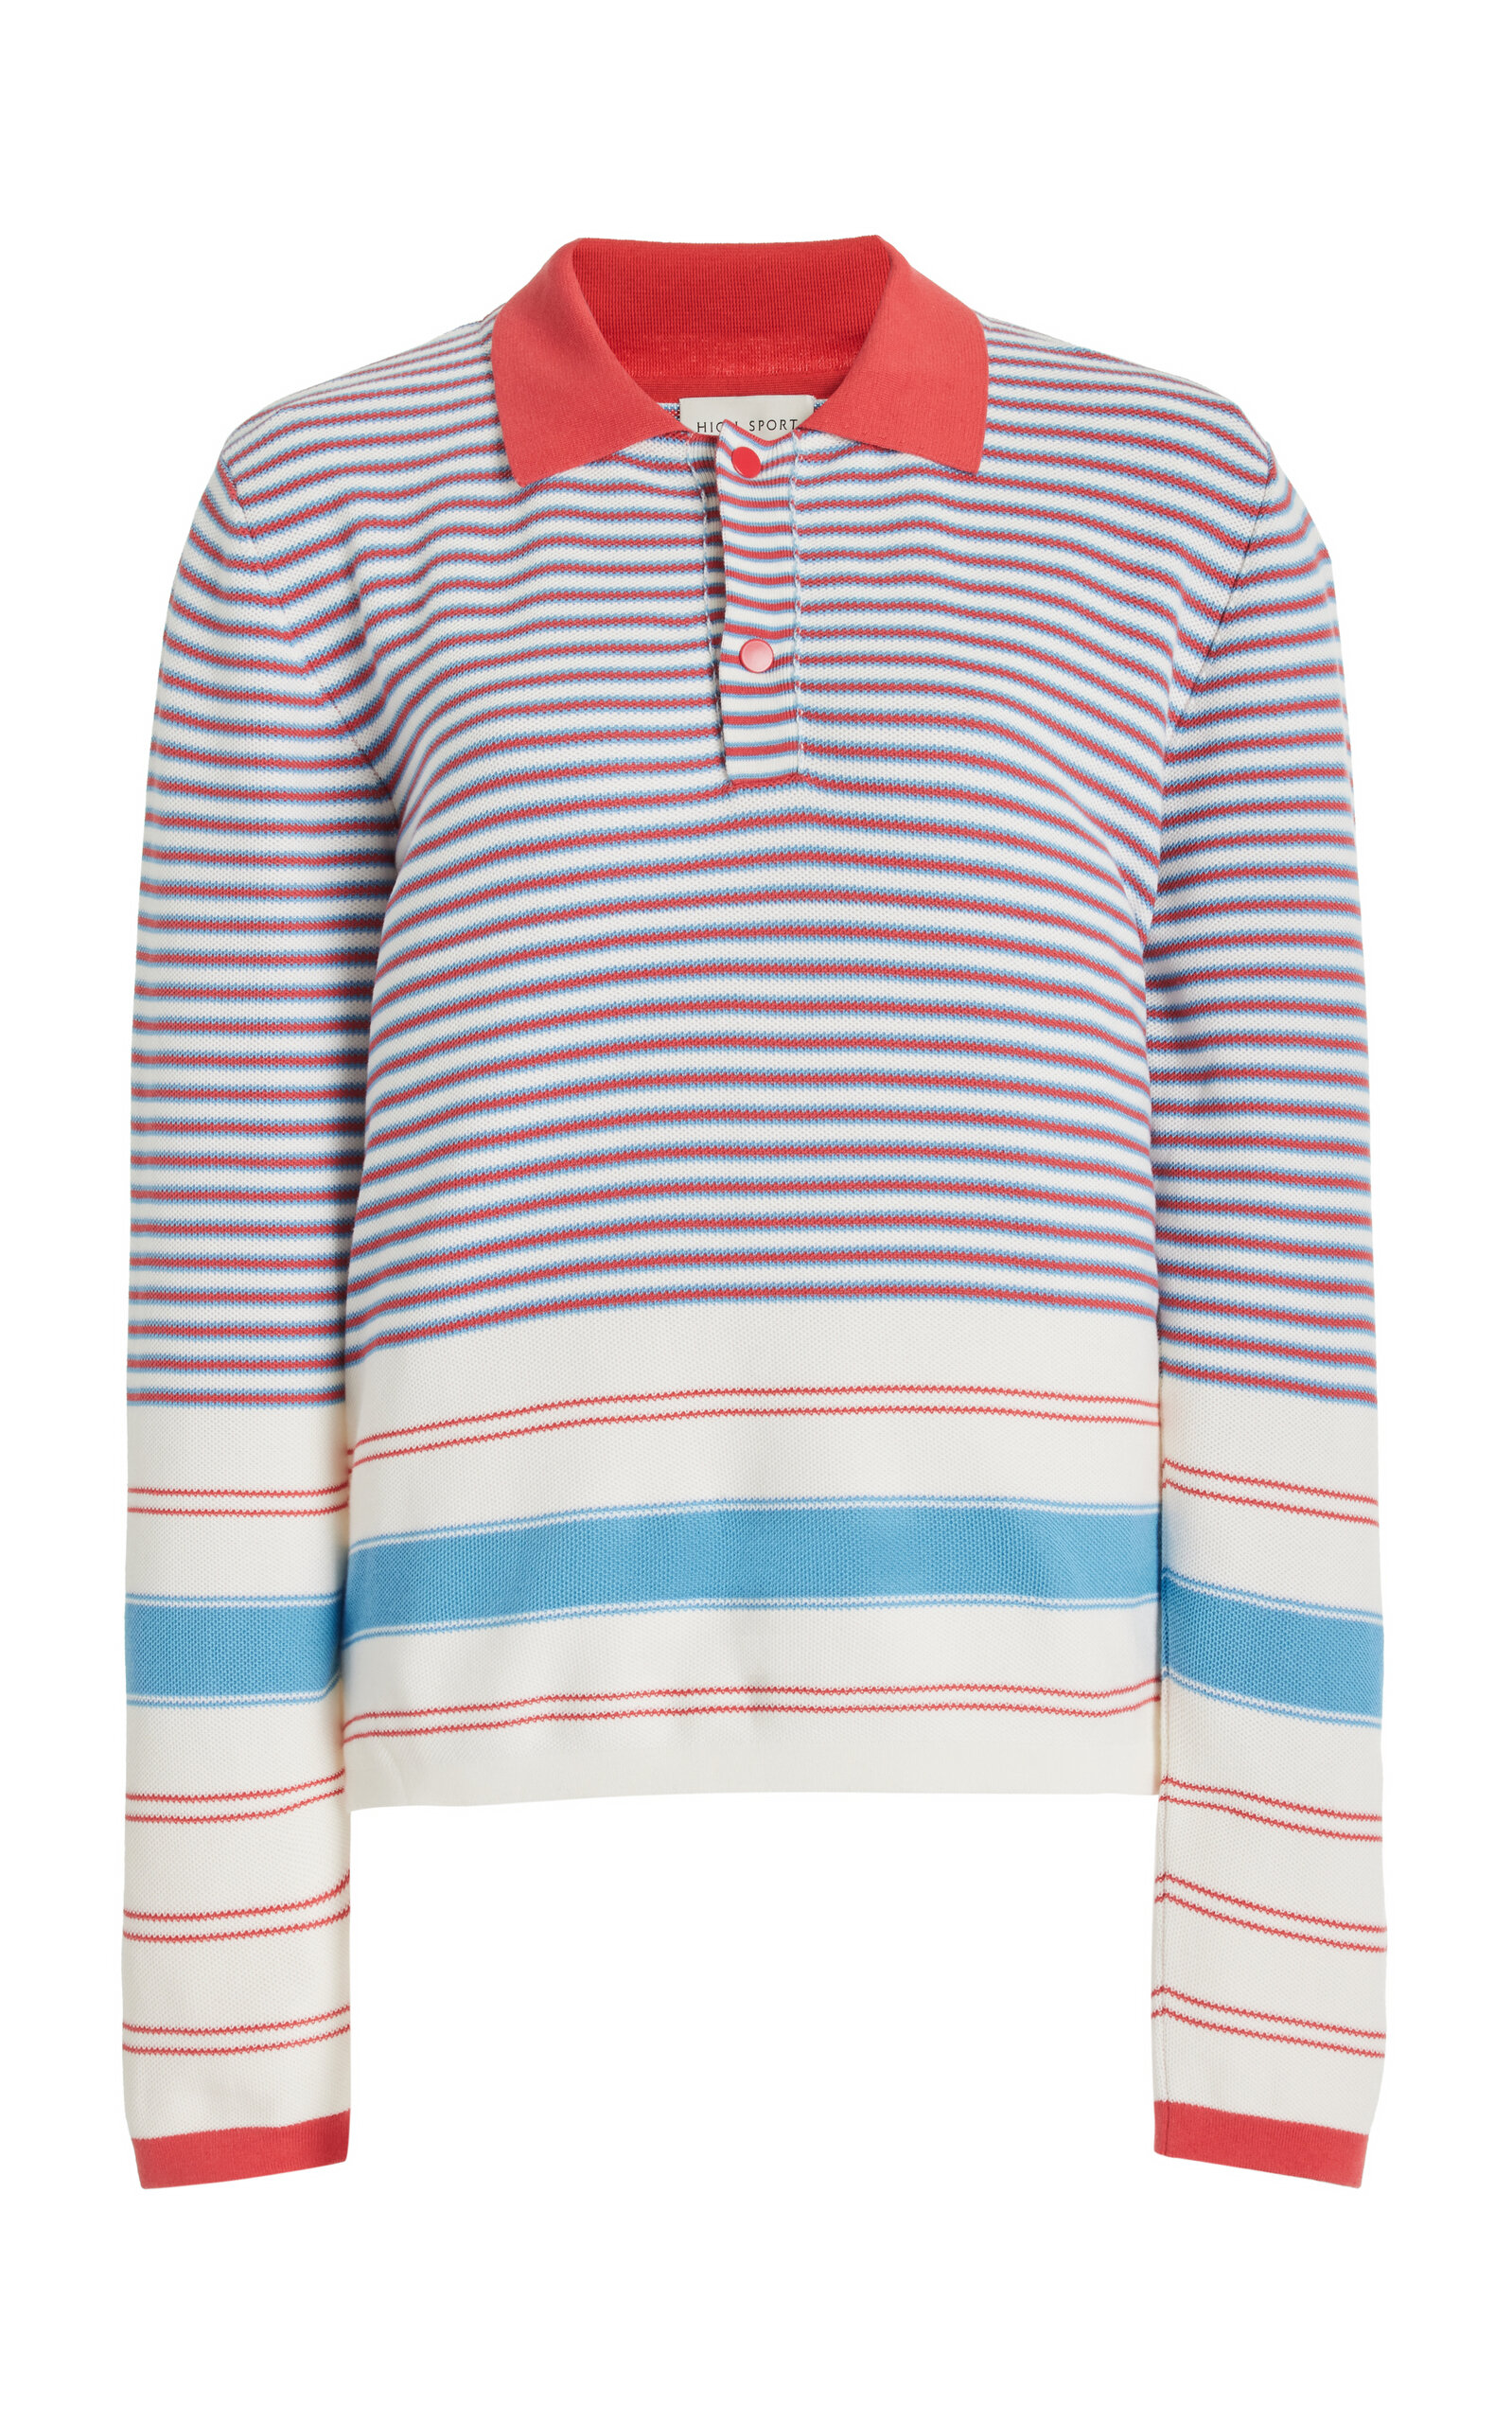 High Sport Exclusive Striped Cotton Polo Top